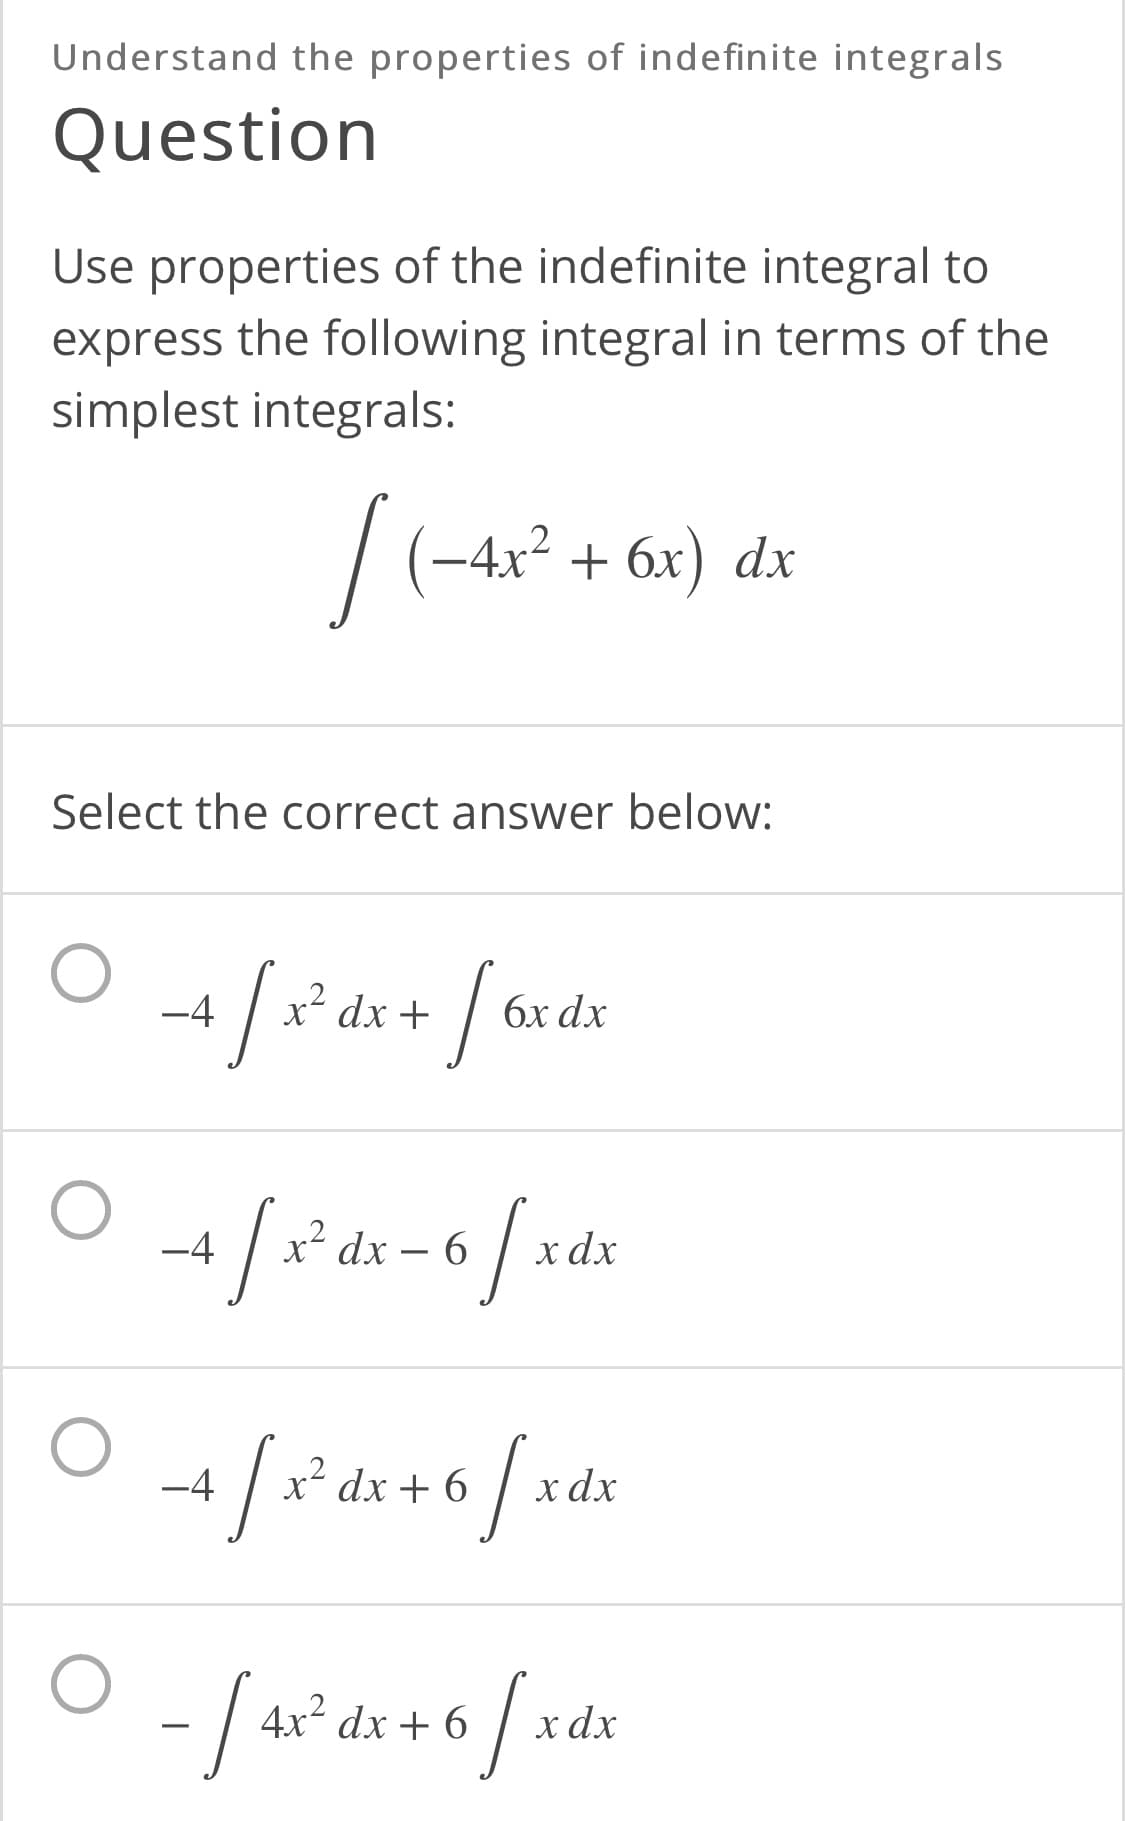 Understand the properties of indefinite integrals
Question
Use properties of the indefinite integral to
express the following integral in terms of the
simplest integrals:
|
(-4x² + 6x) dx
+ бх)
Select the correct answer below:
-4
x- dx +
бх dx
/-
-4
dx – 6
х dx
-4
dx + 6
хаx
-/-
4x dx + 6
x dx
